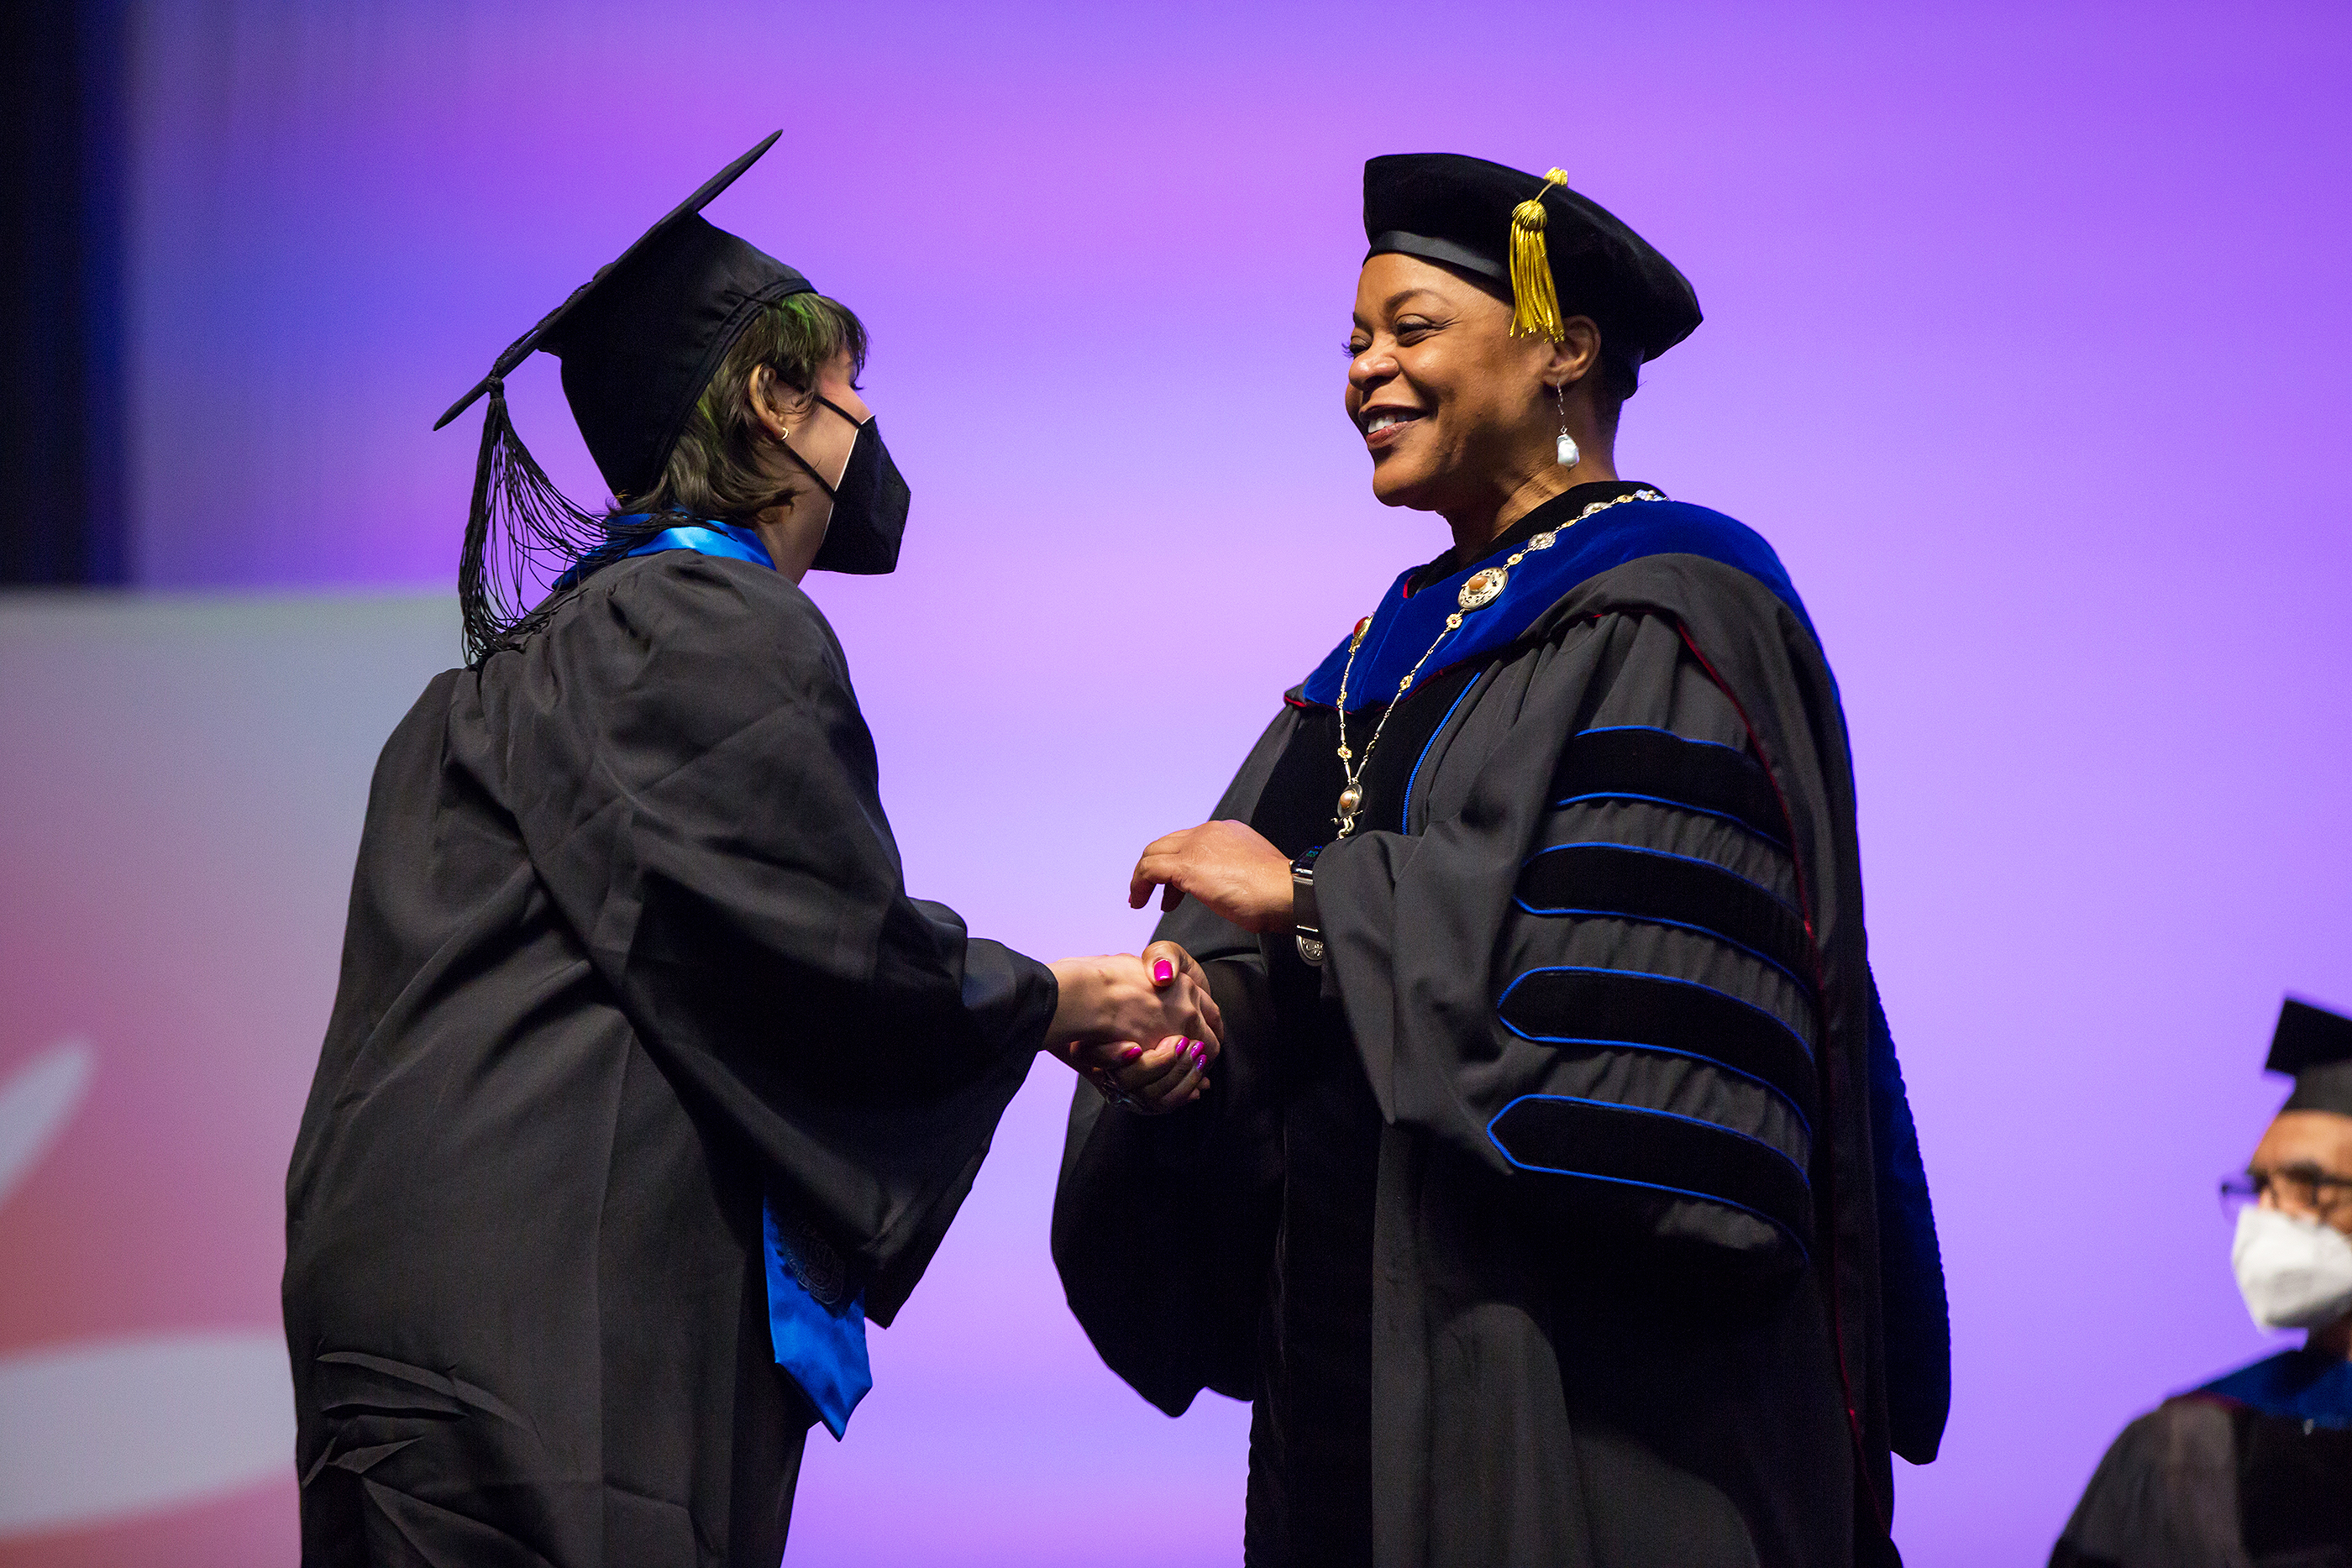 Williams shakes hands with a graduating student